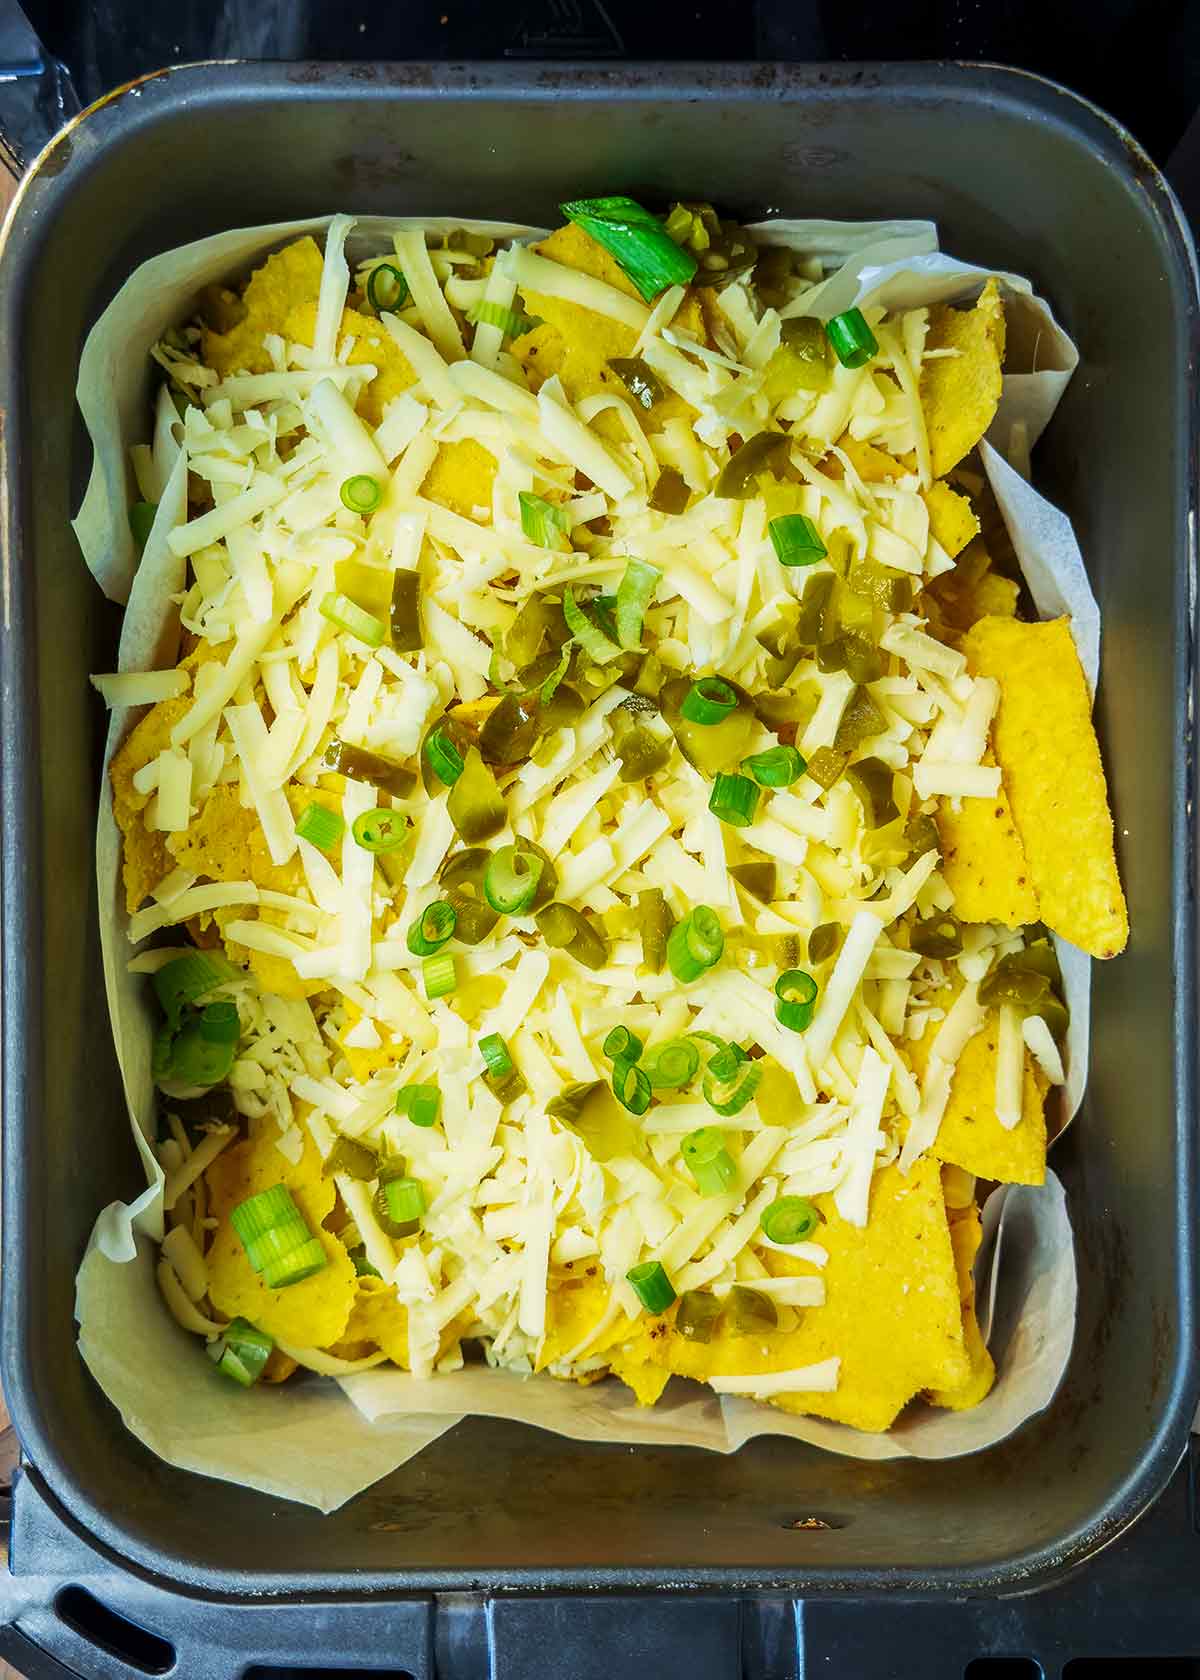 Tortilla chips, cheese, jalapenos and green onions in an air fryer basket.